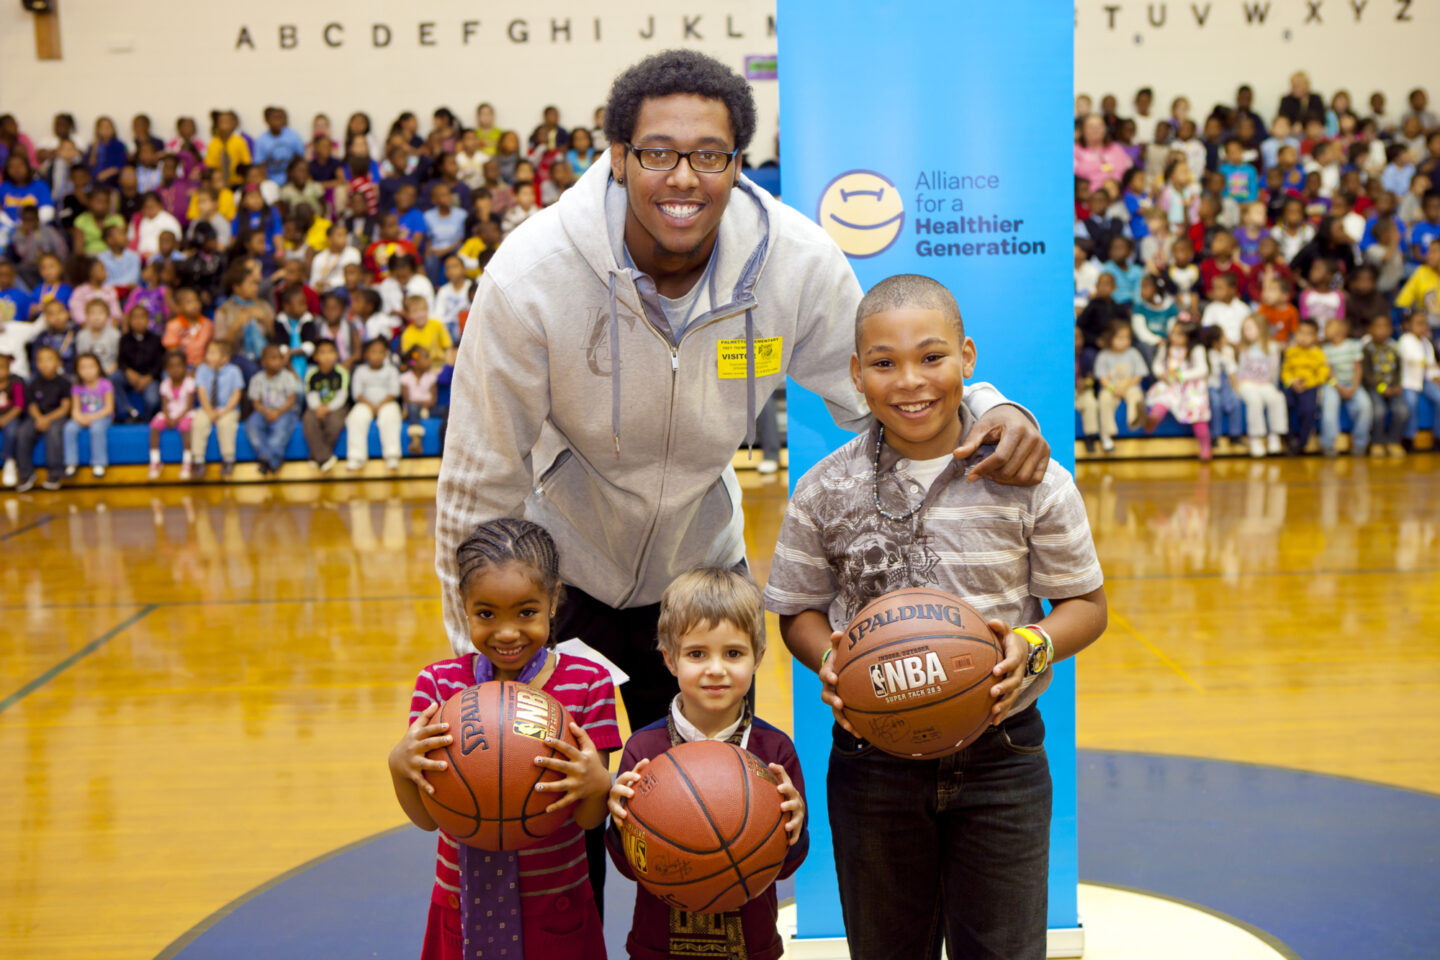 A professional basketball player takes a photo with students at an elementary school in Georgia